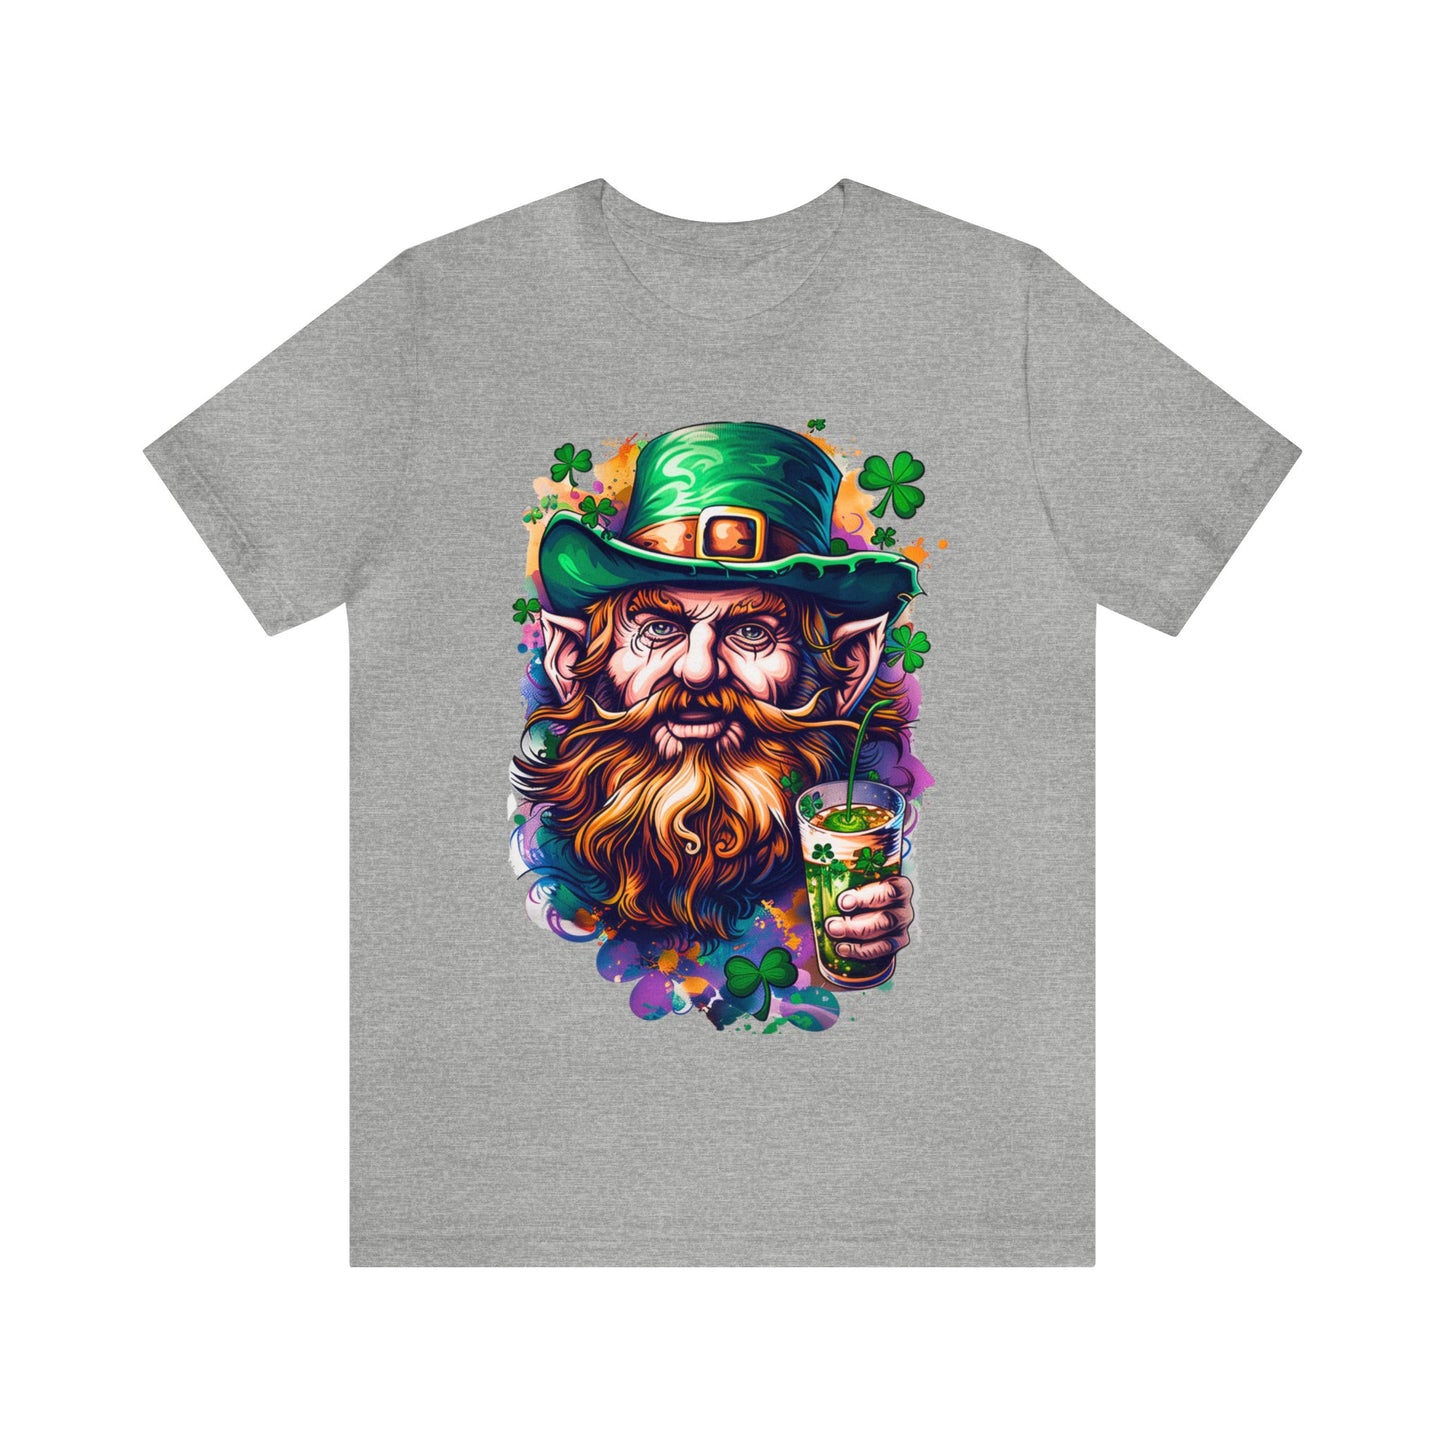 St Patrick's Day Party Shirt St Paddy Shirt Clover Shirt